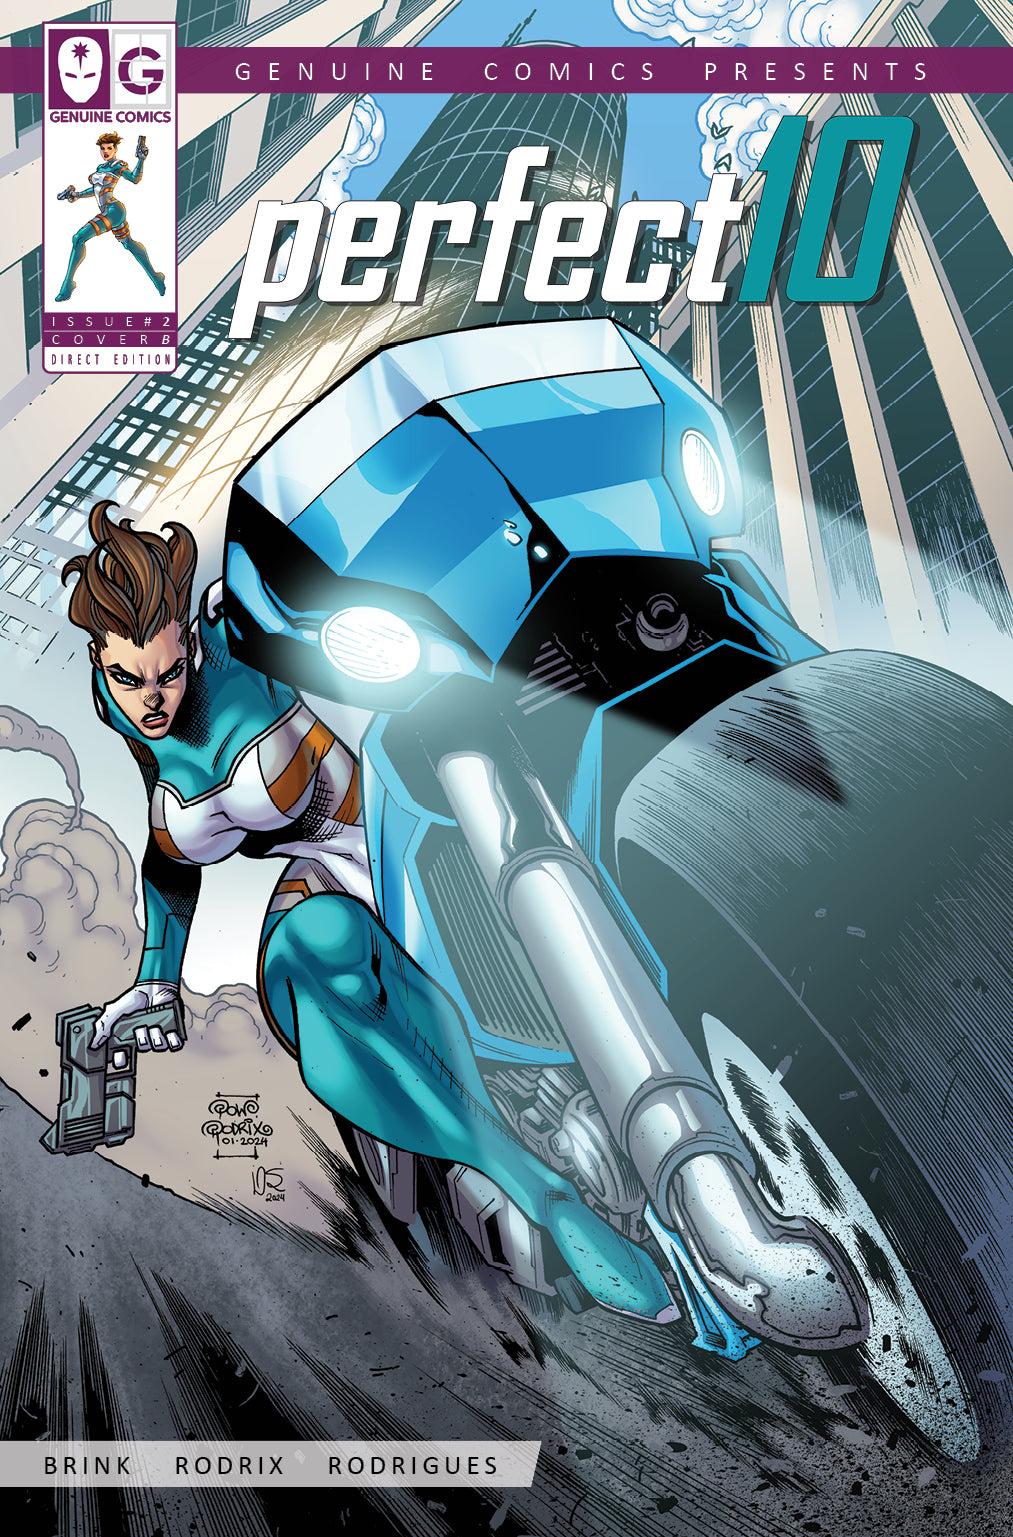 Perfect 10 #2 cover B